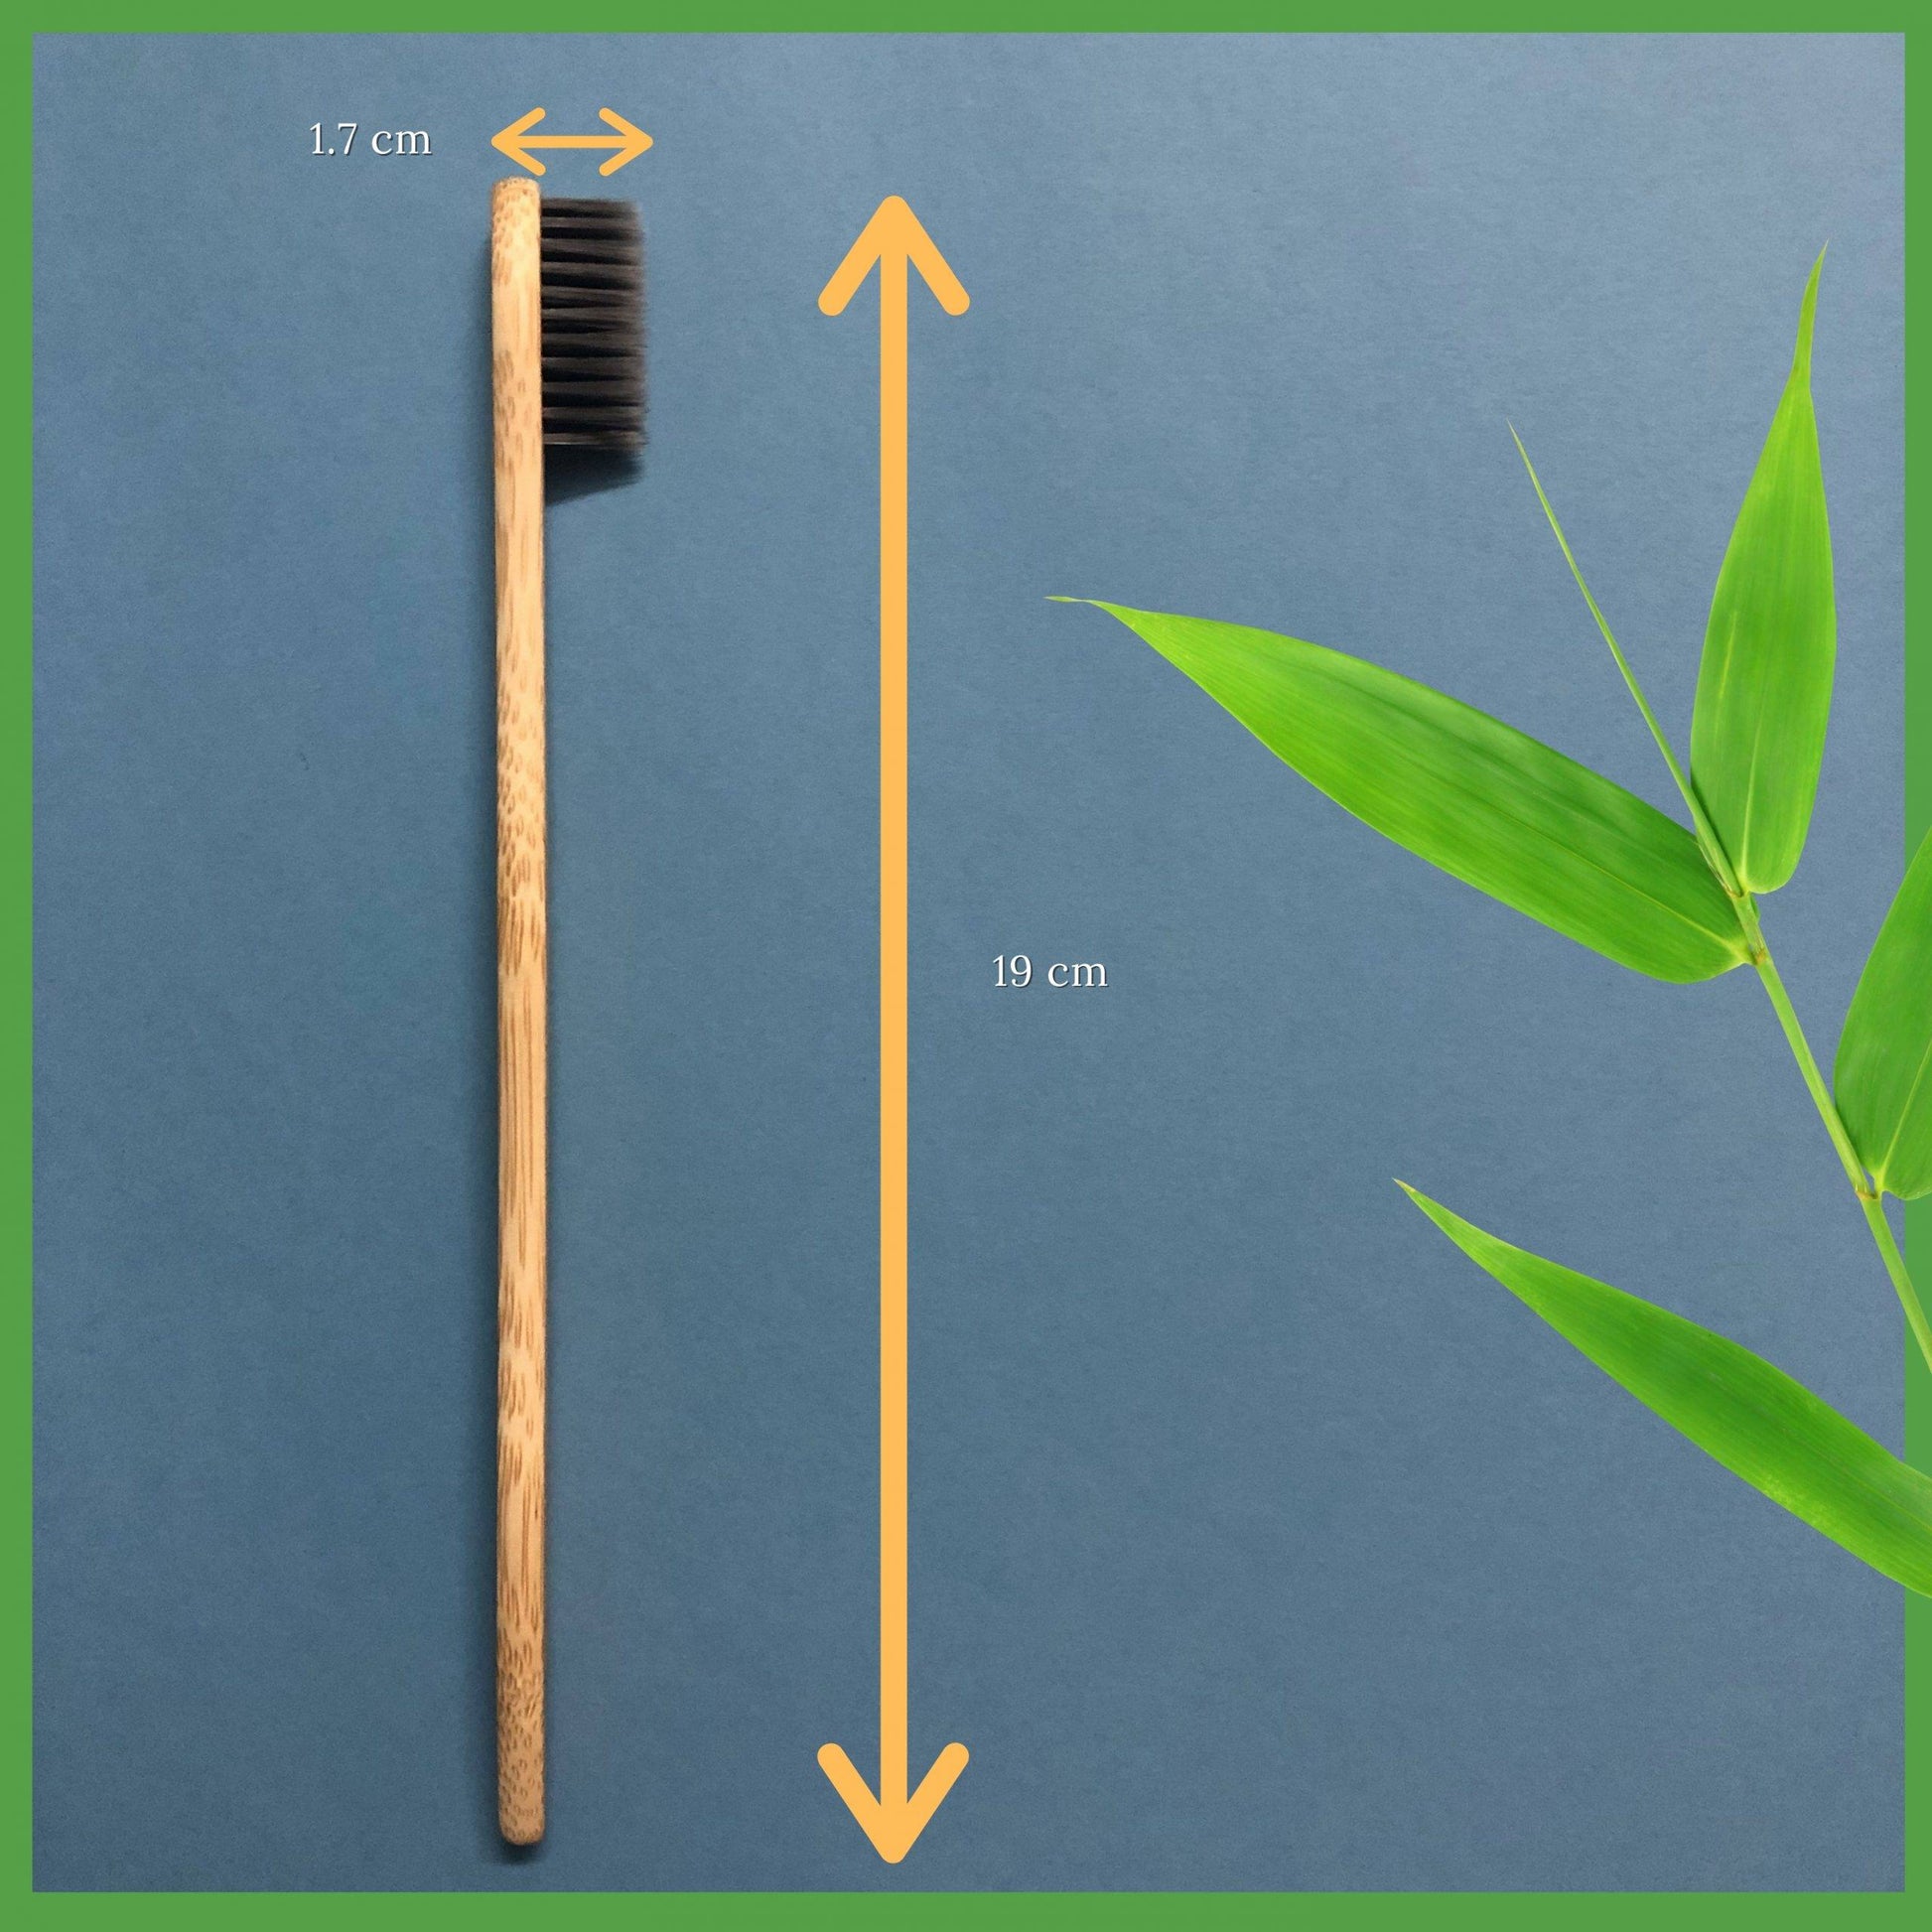 100% Biodegradable Bamboo Toothbrush with Soft Charcoal-activated Bristles - Dimensions